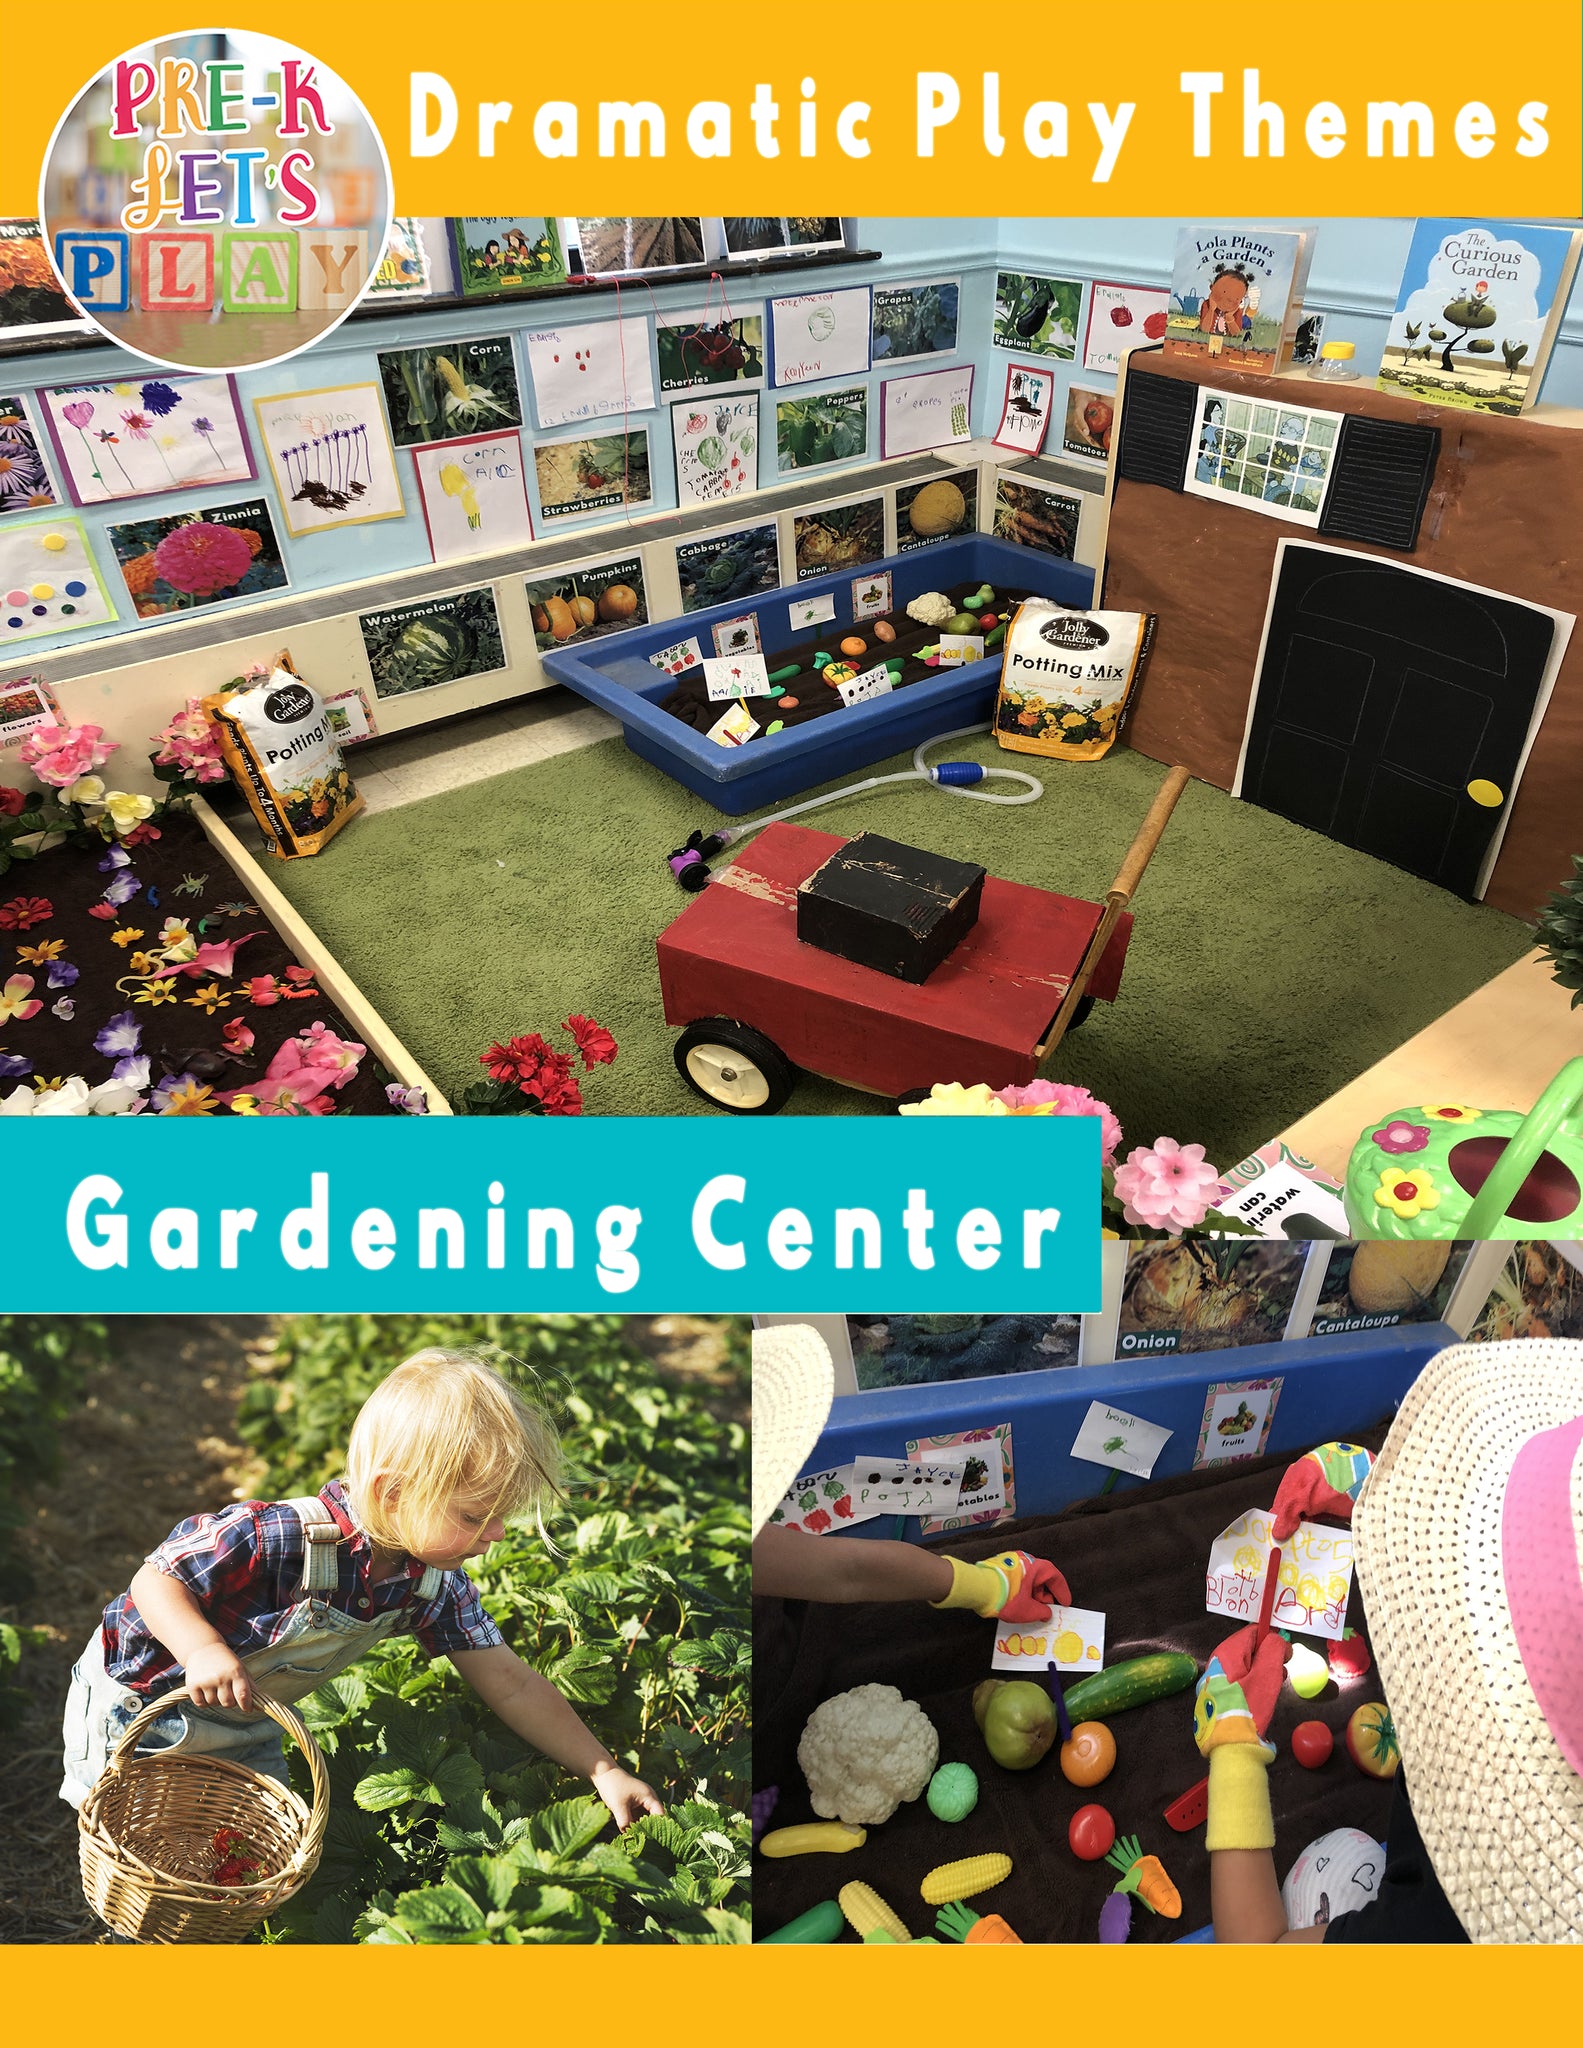 Pretend Play Spring Time Garden Theme | Imaginative Play for Dramatic Play